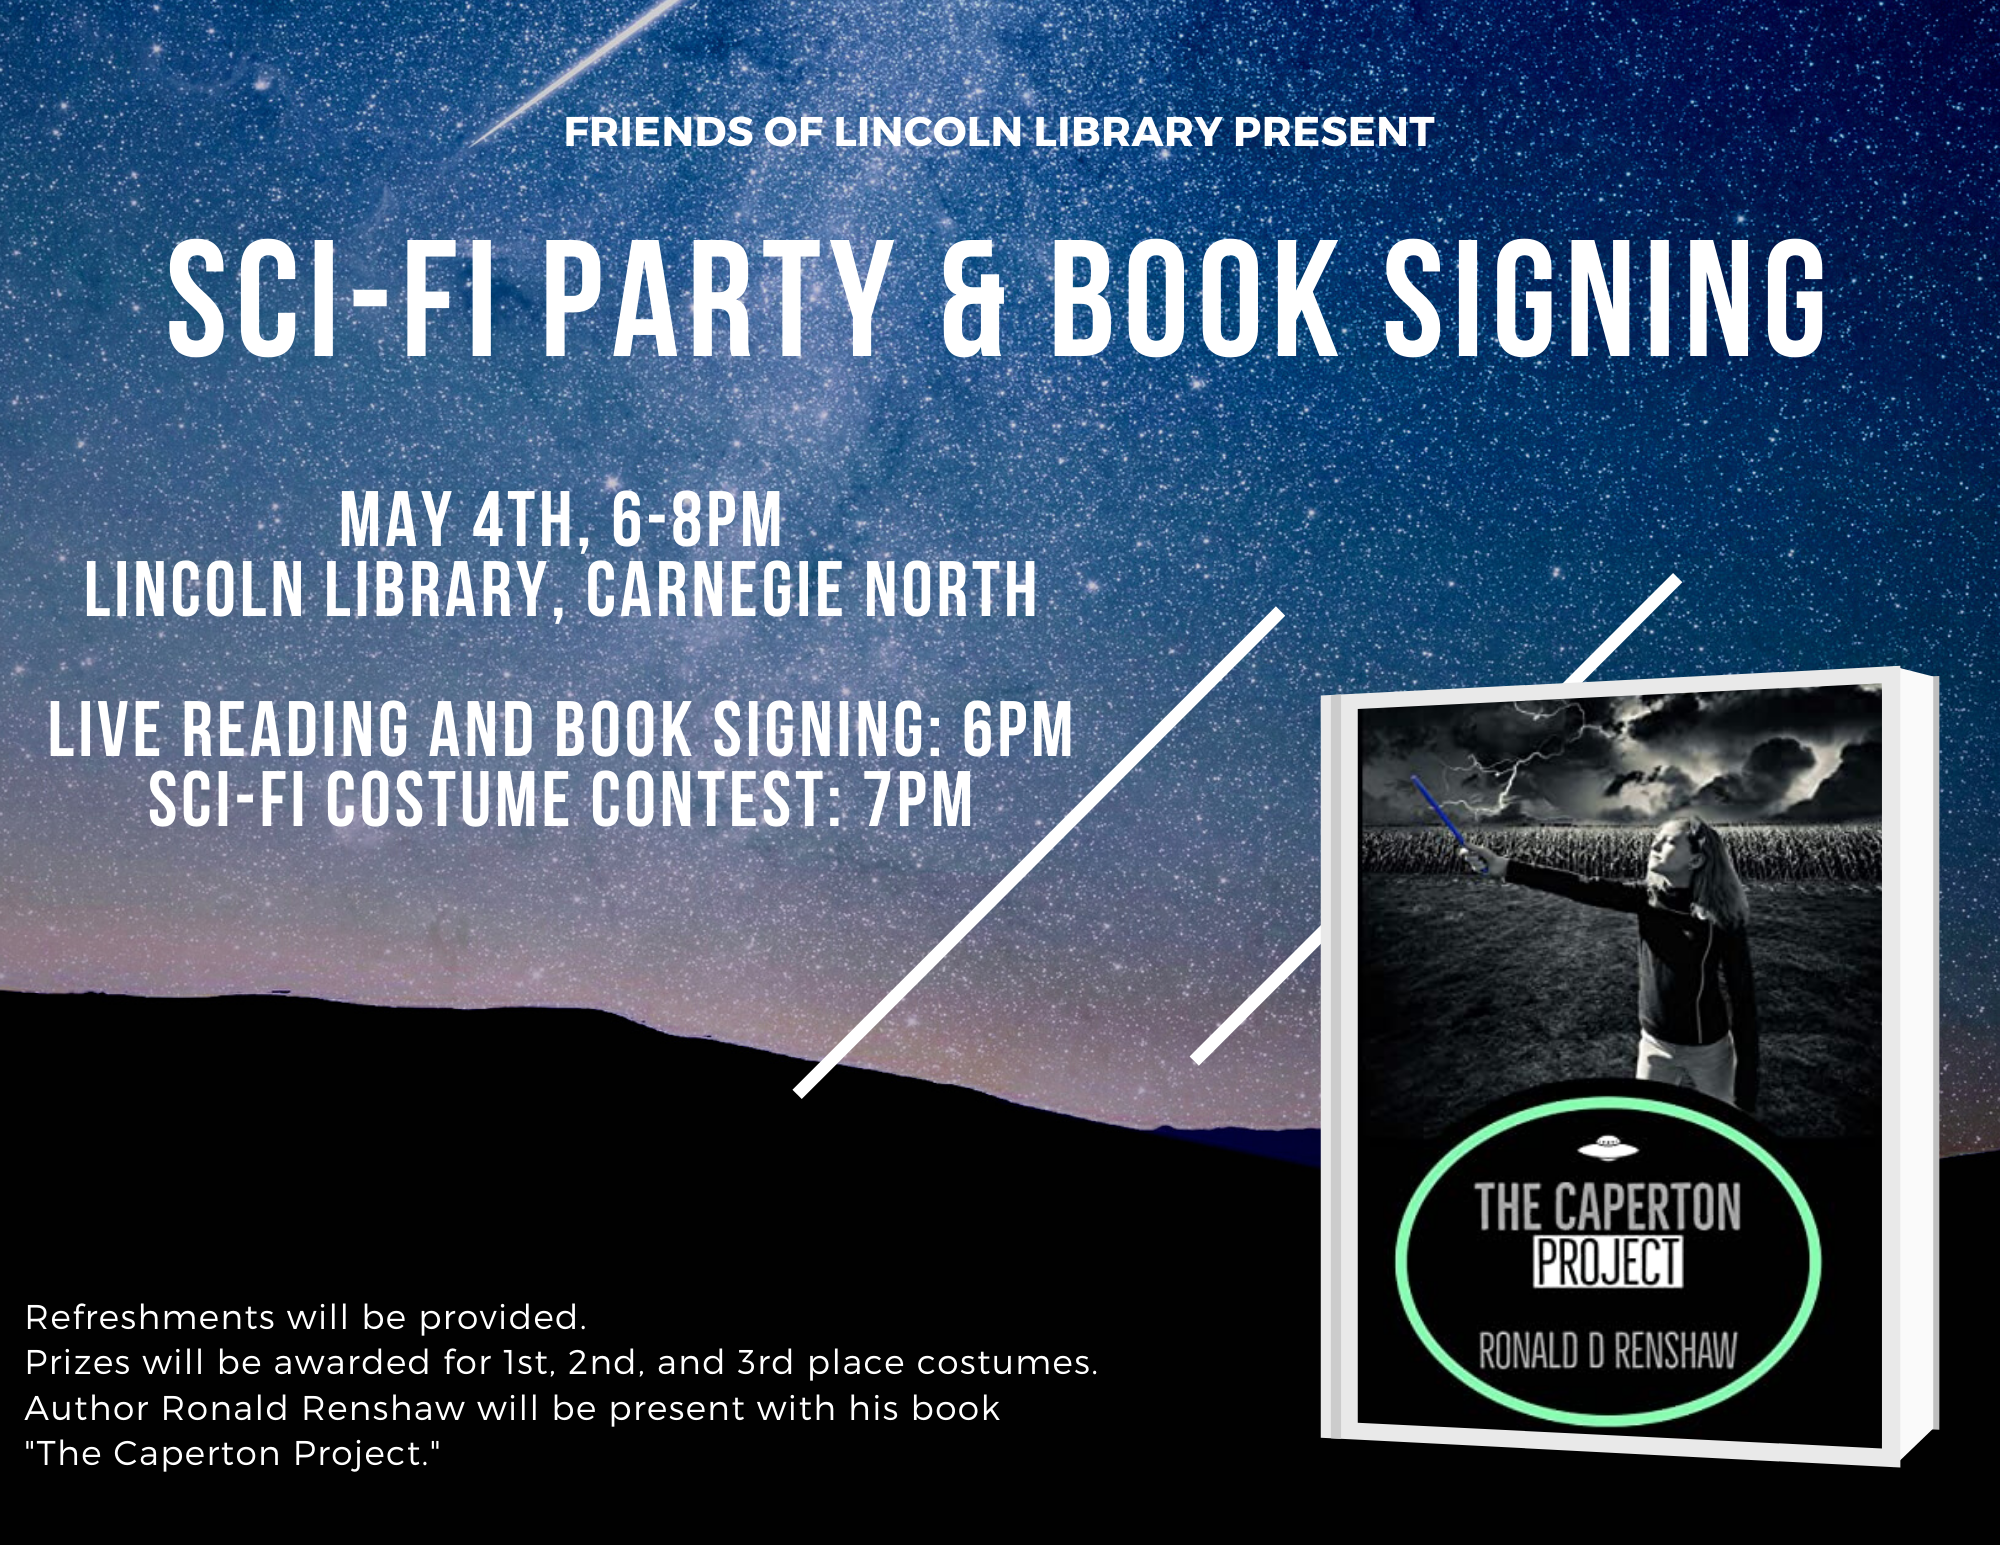 Flyer for sci-fi party and book signing, showing a meteor shower